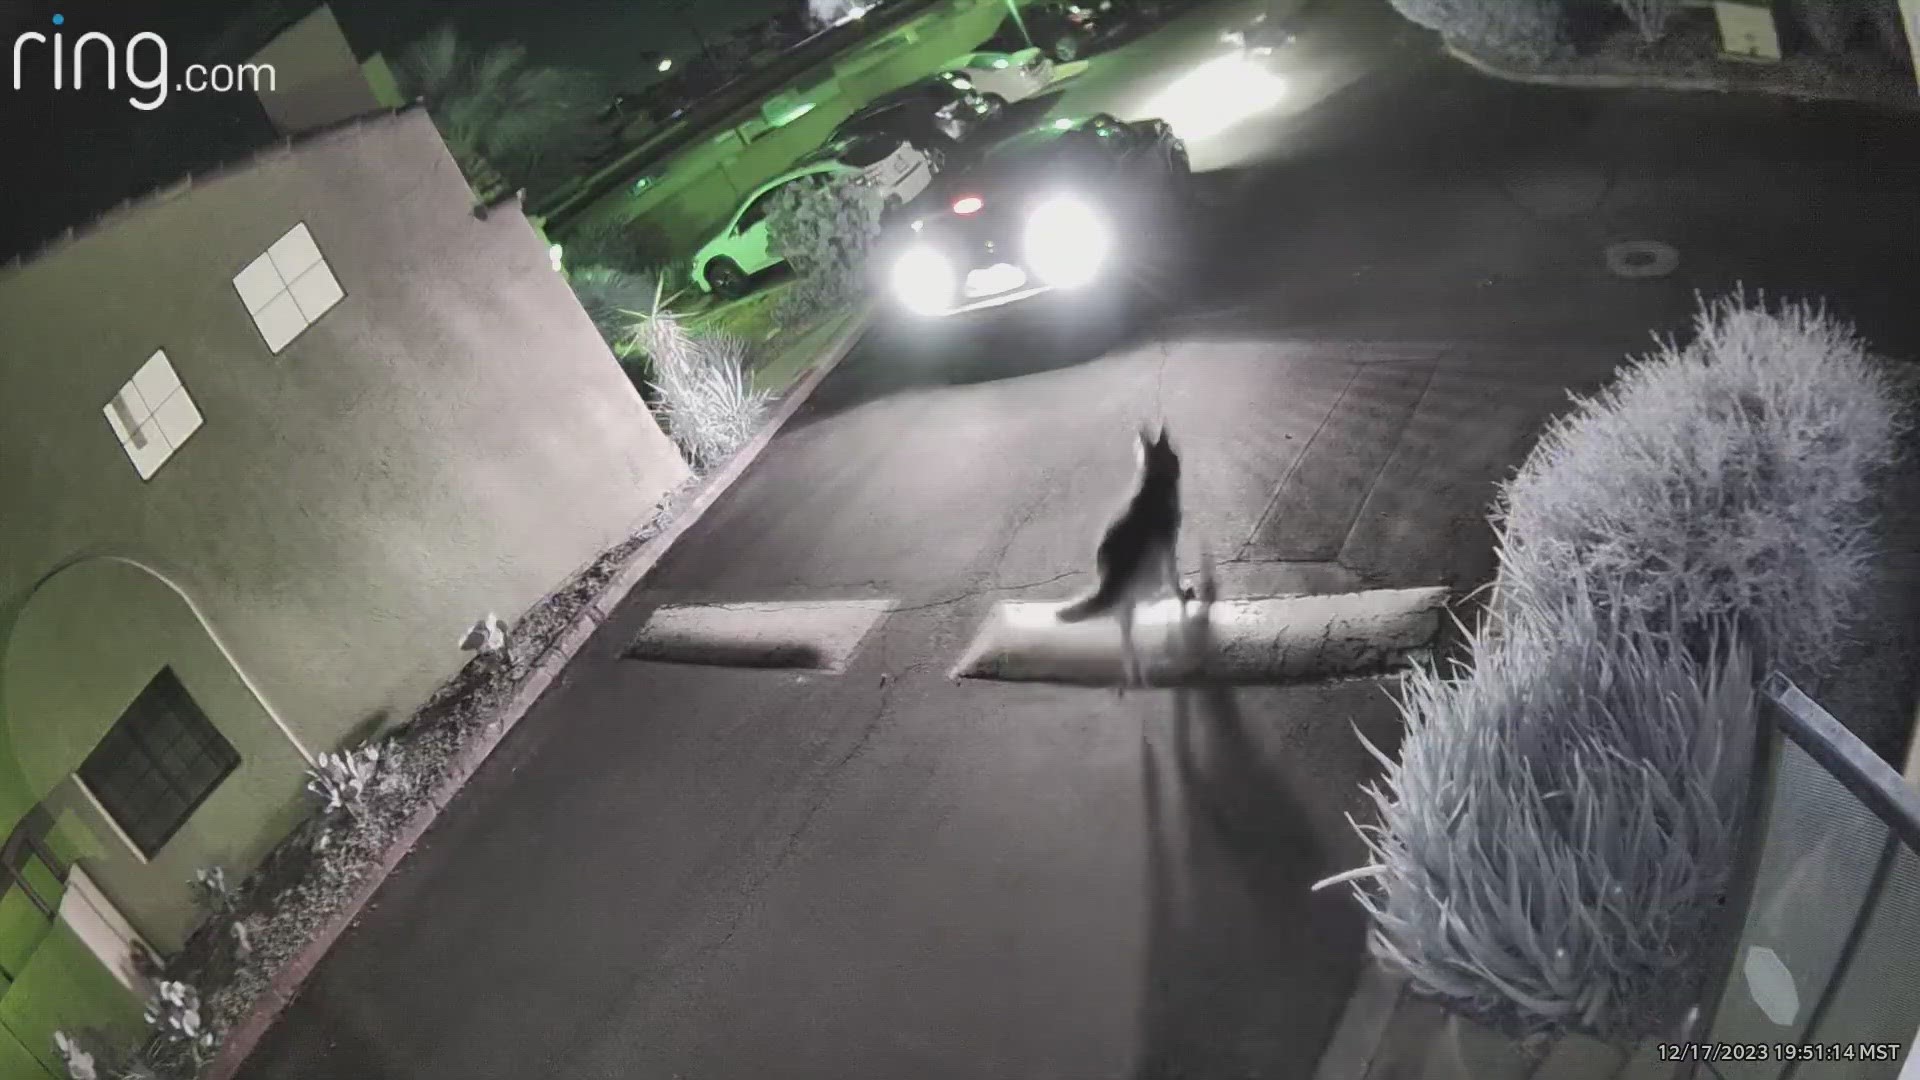 A Phoenix couple hired a dog sitter through a popular pet sitting app. Doorbell camera footage showed the dogs running in the street near cars and a lack of care.